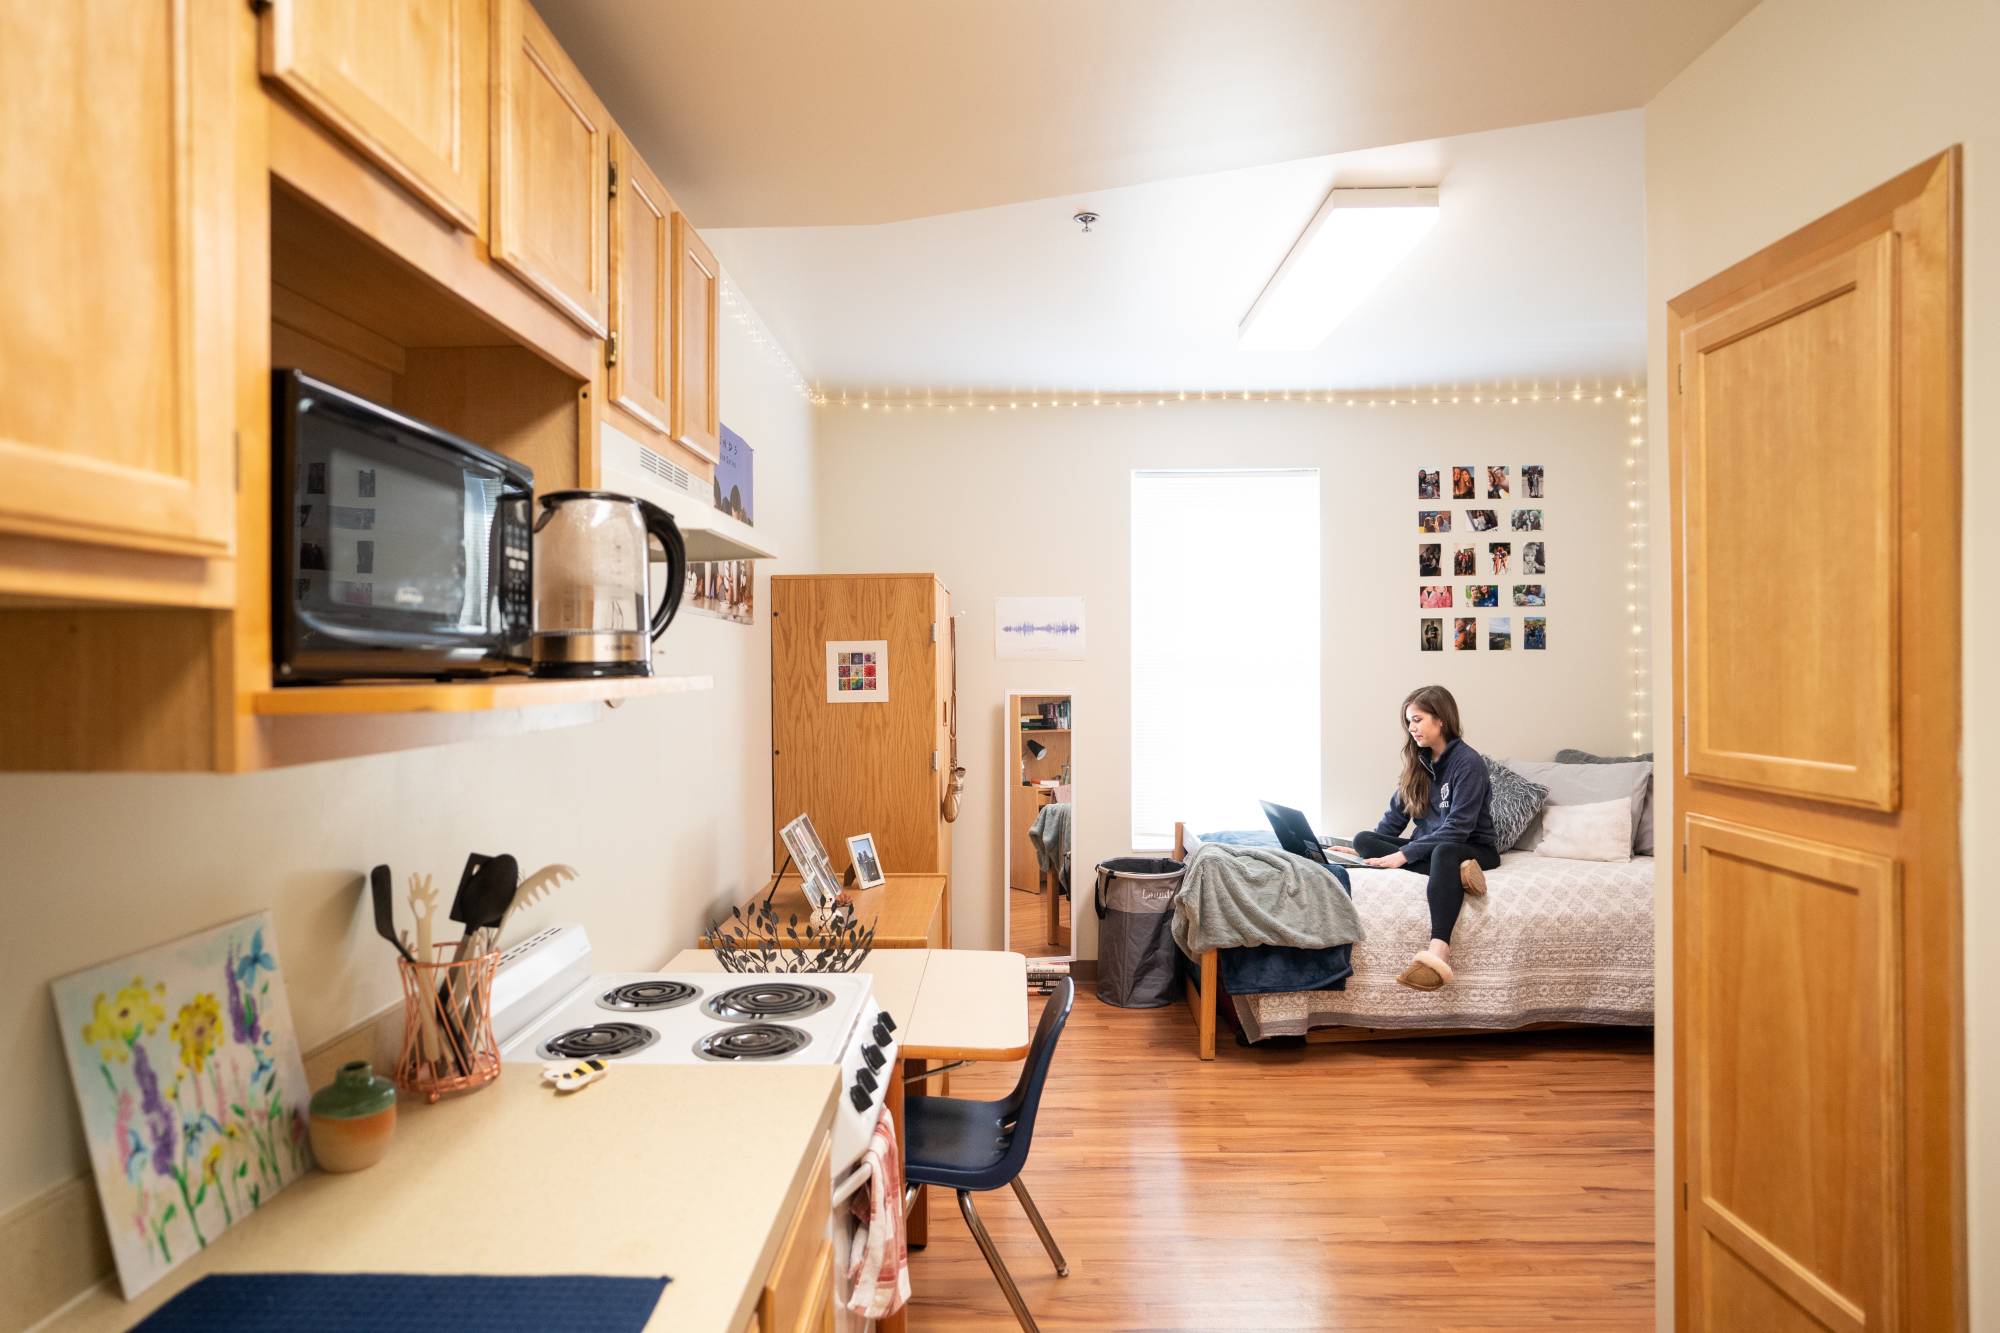 GVSU student studying in an on-campus apartment in Grand Rapids.